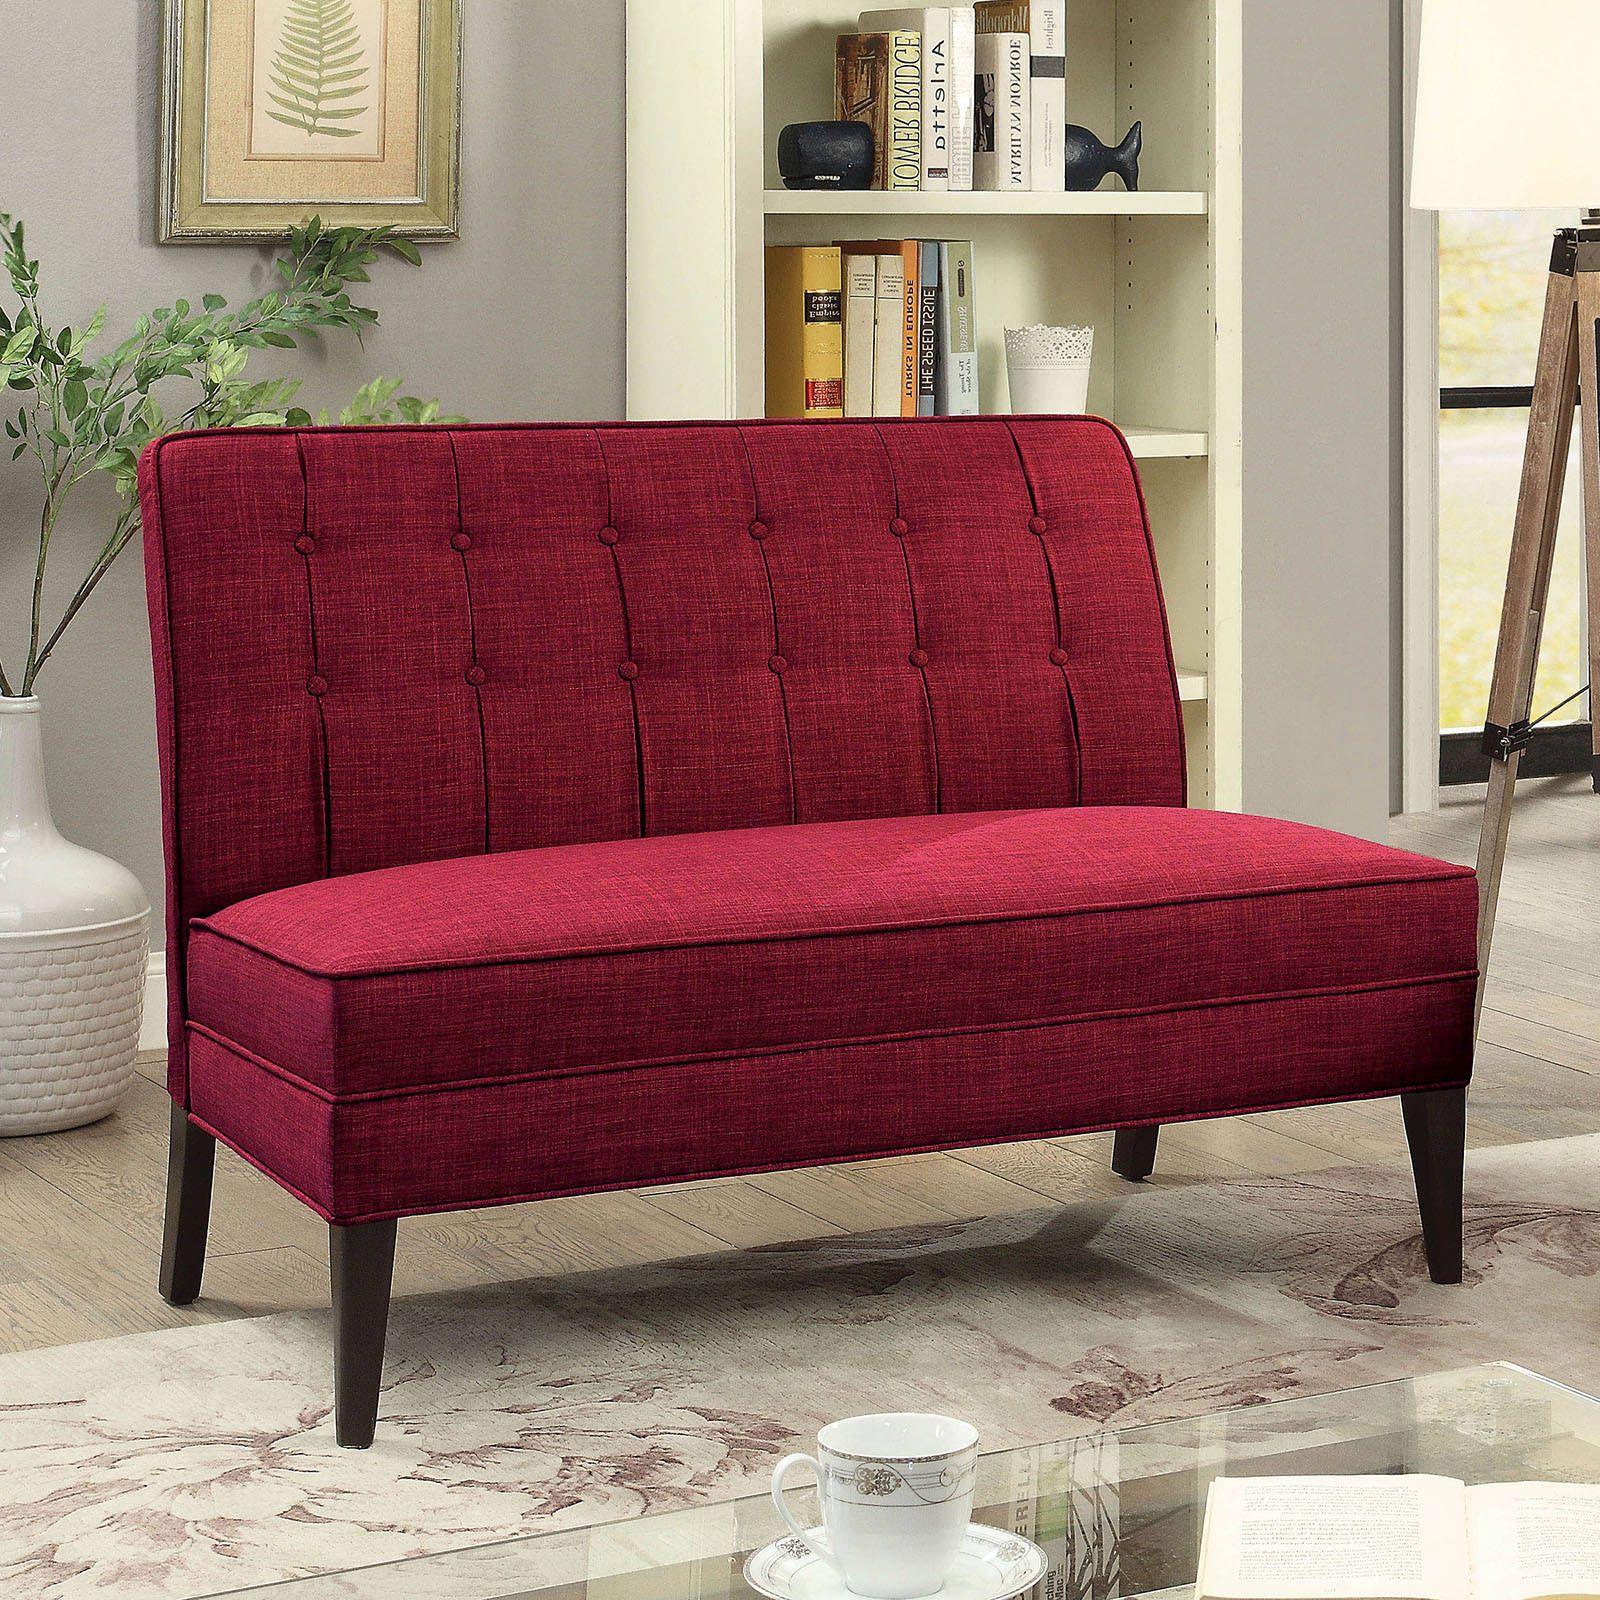 Furniture Of America Deandra Red Bench (View 15 of 25)